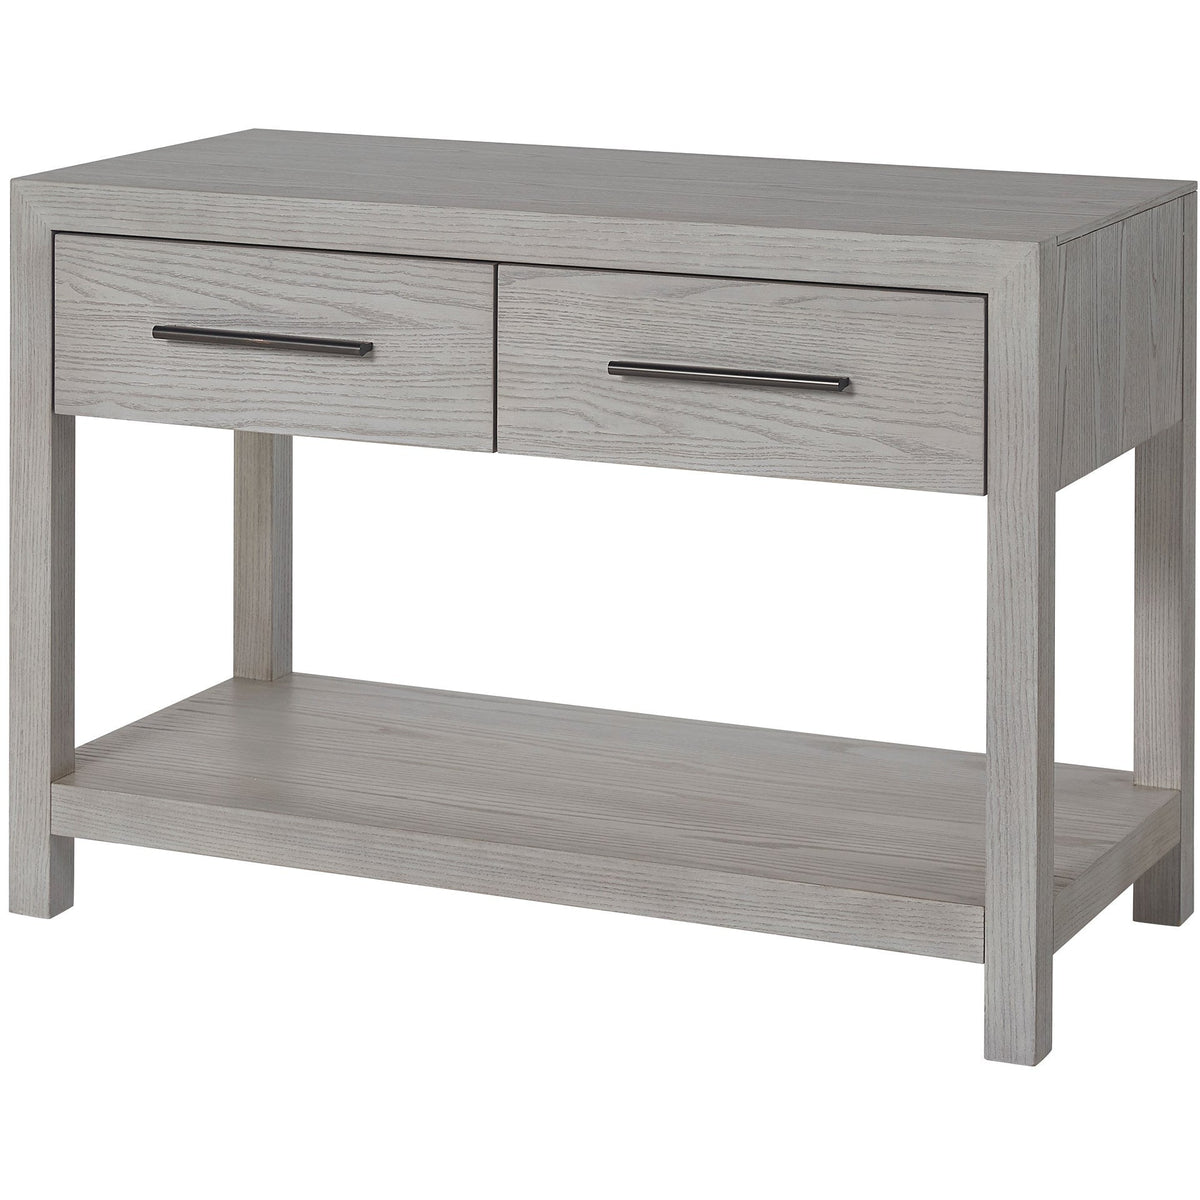 Two Drawer Nightstand - Be Bold Furniture